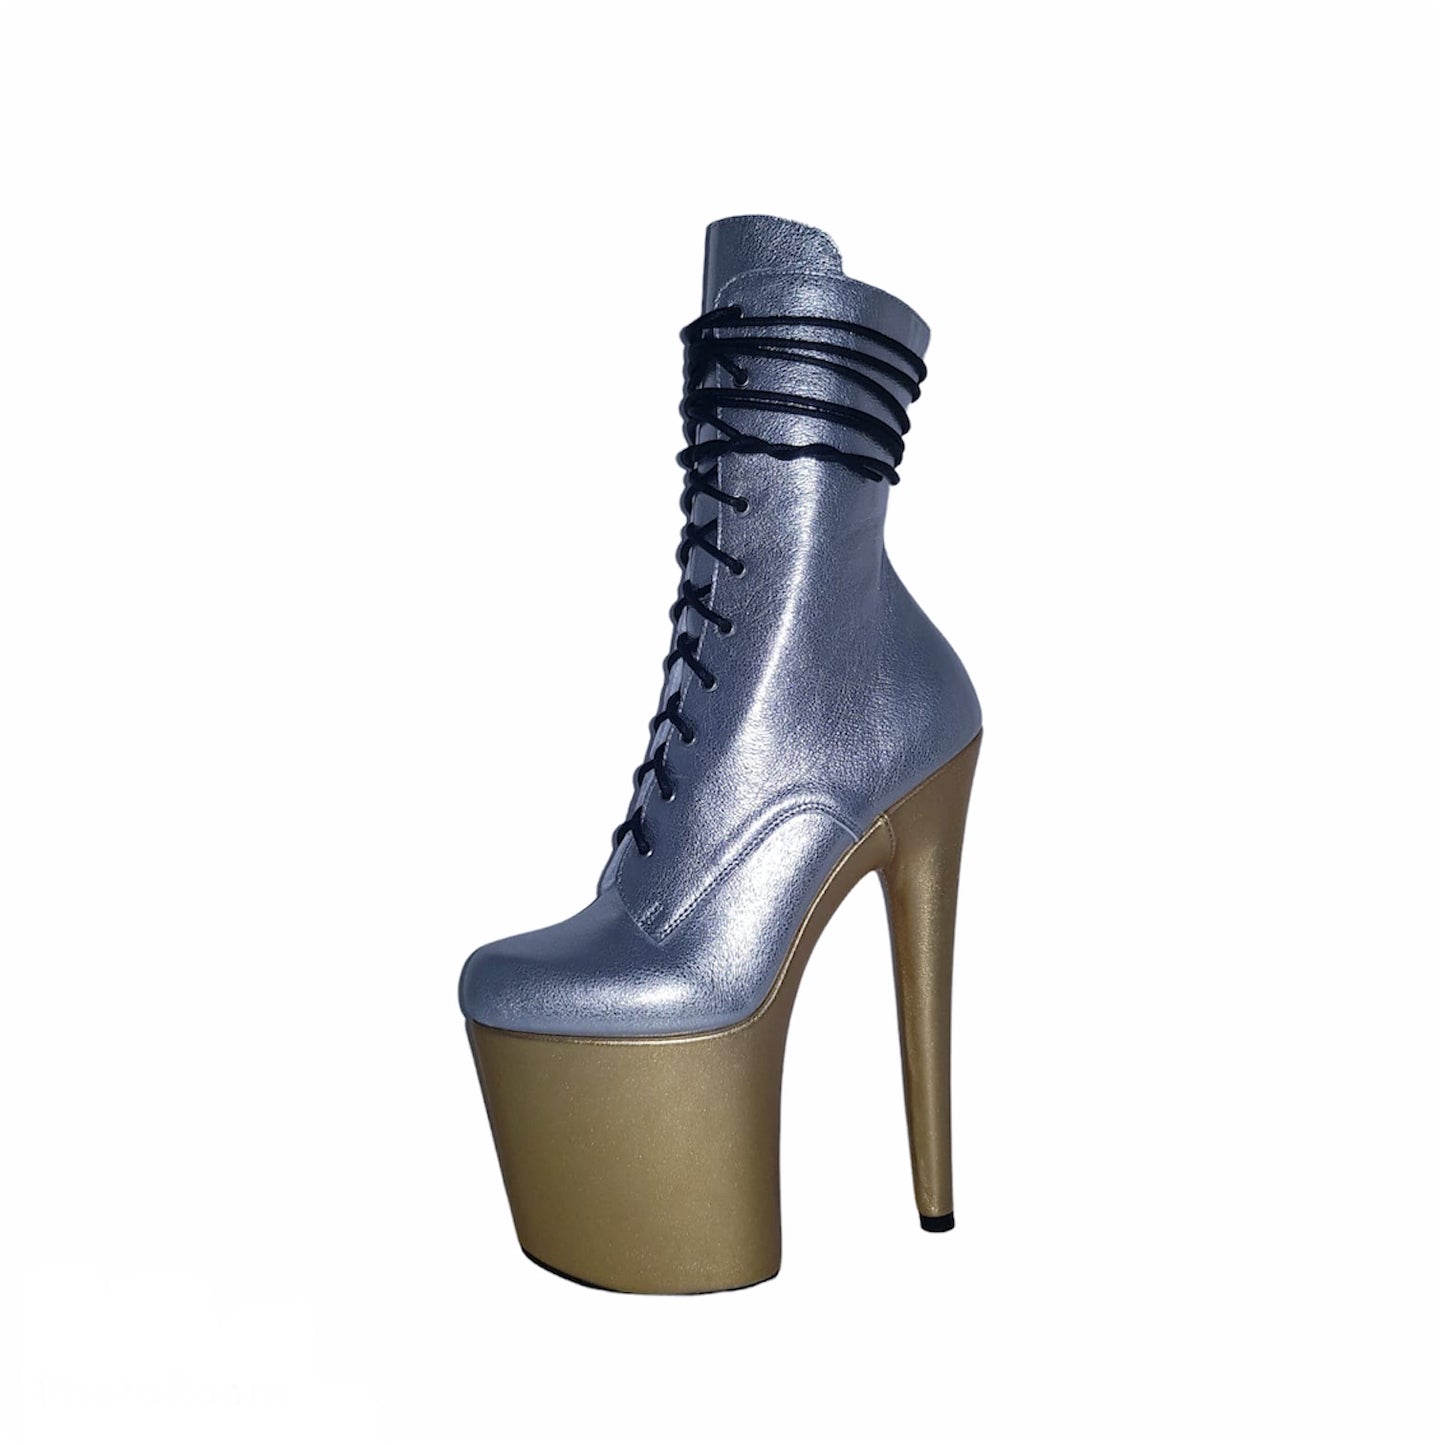 Silver and gold genuine leather ankle - mid calf boots